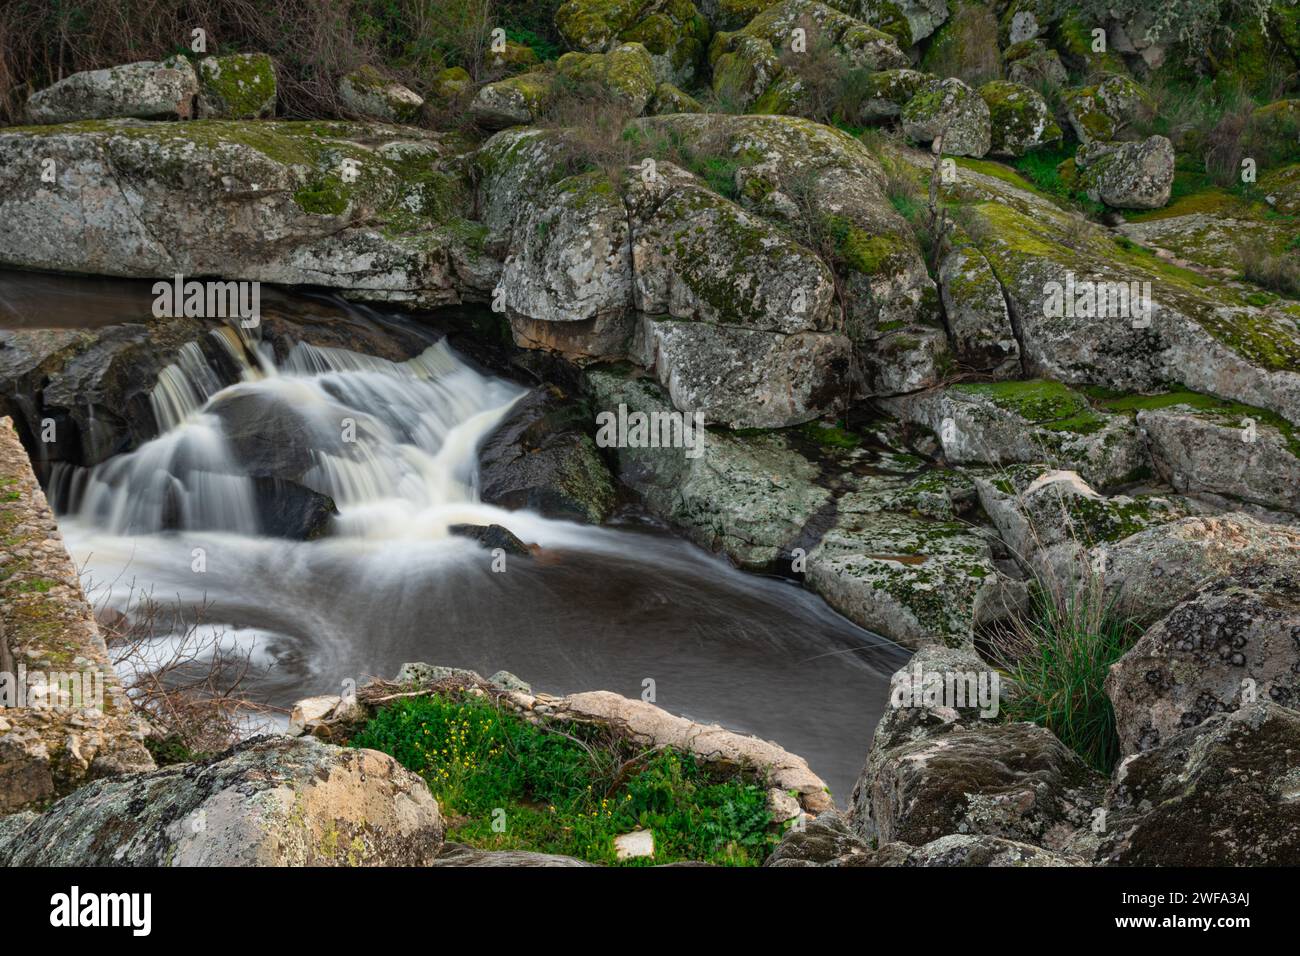 Waterfall formed by the Salor river, at its entrance to the El Gallo reservoir, in Extremadura, Spain. Long exposure photography Stock Photo